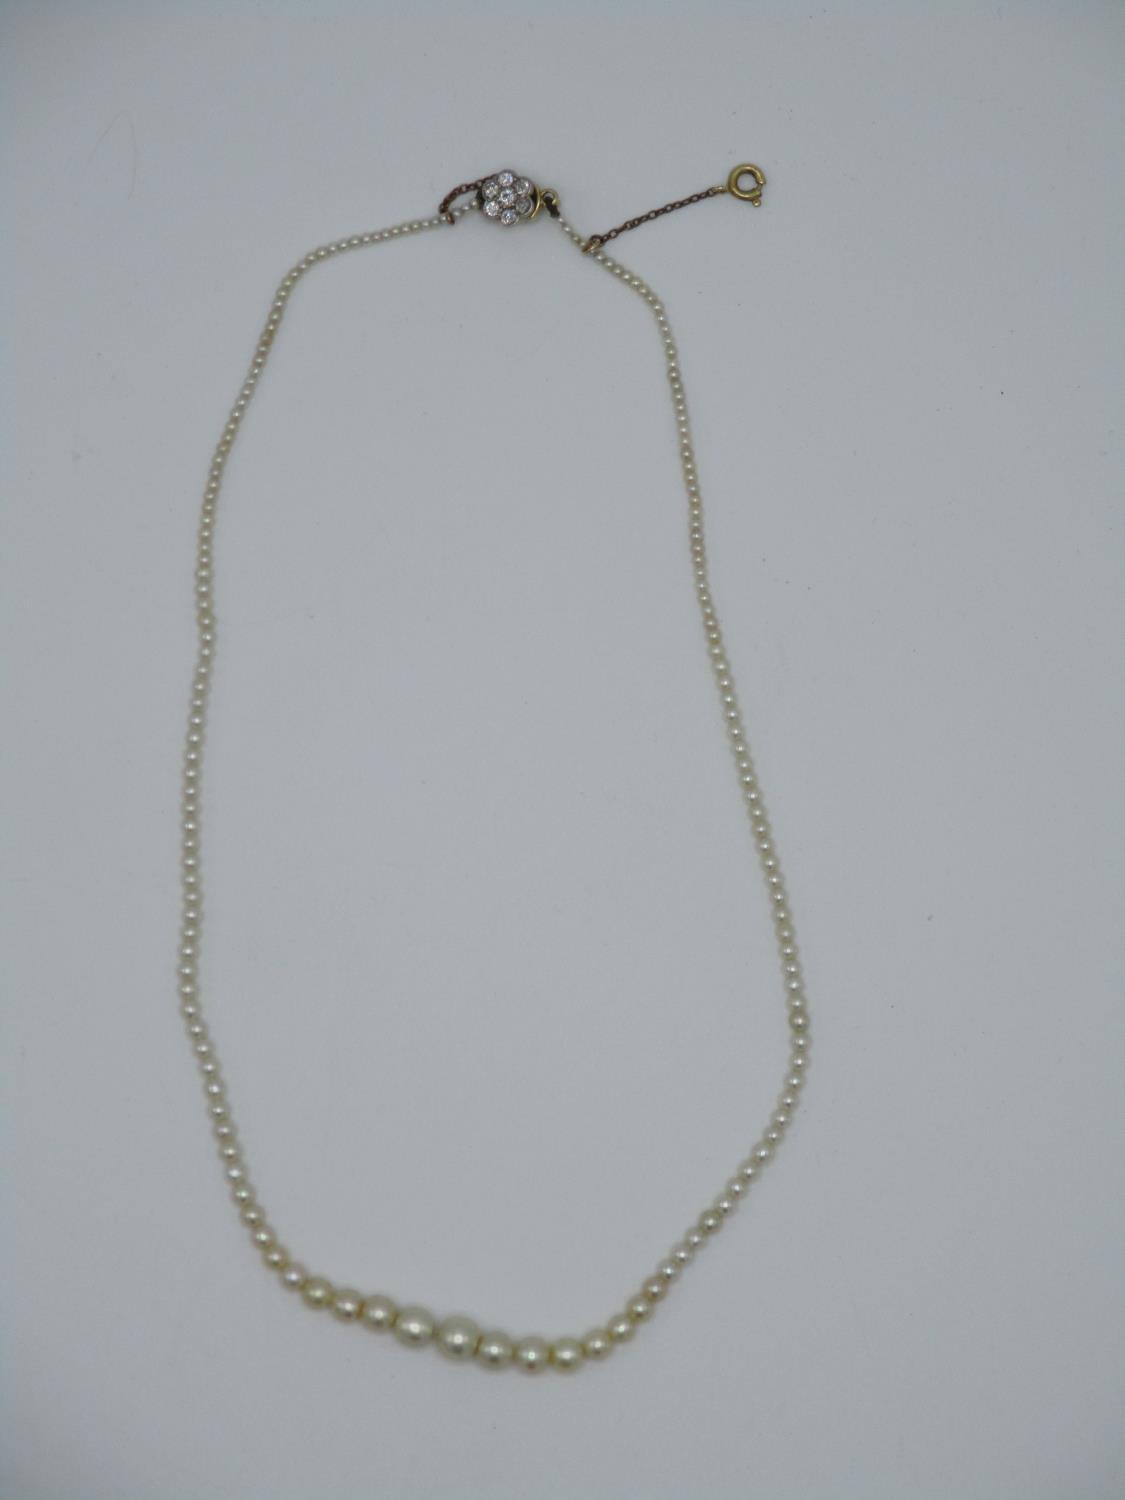 A natural pearl necklace with a gold clasp set with diamonds